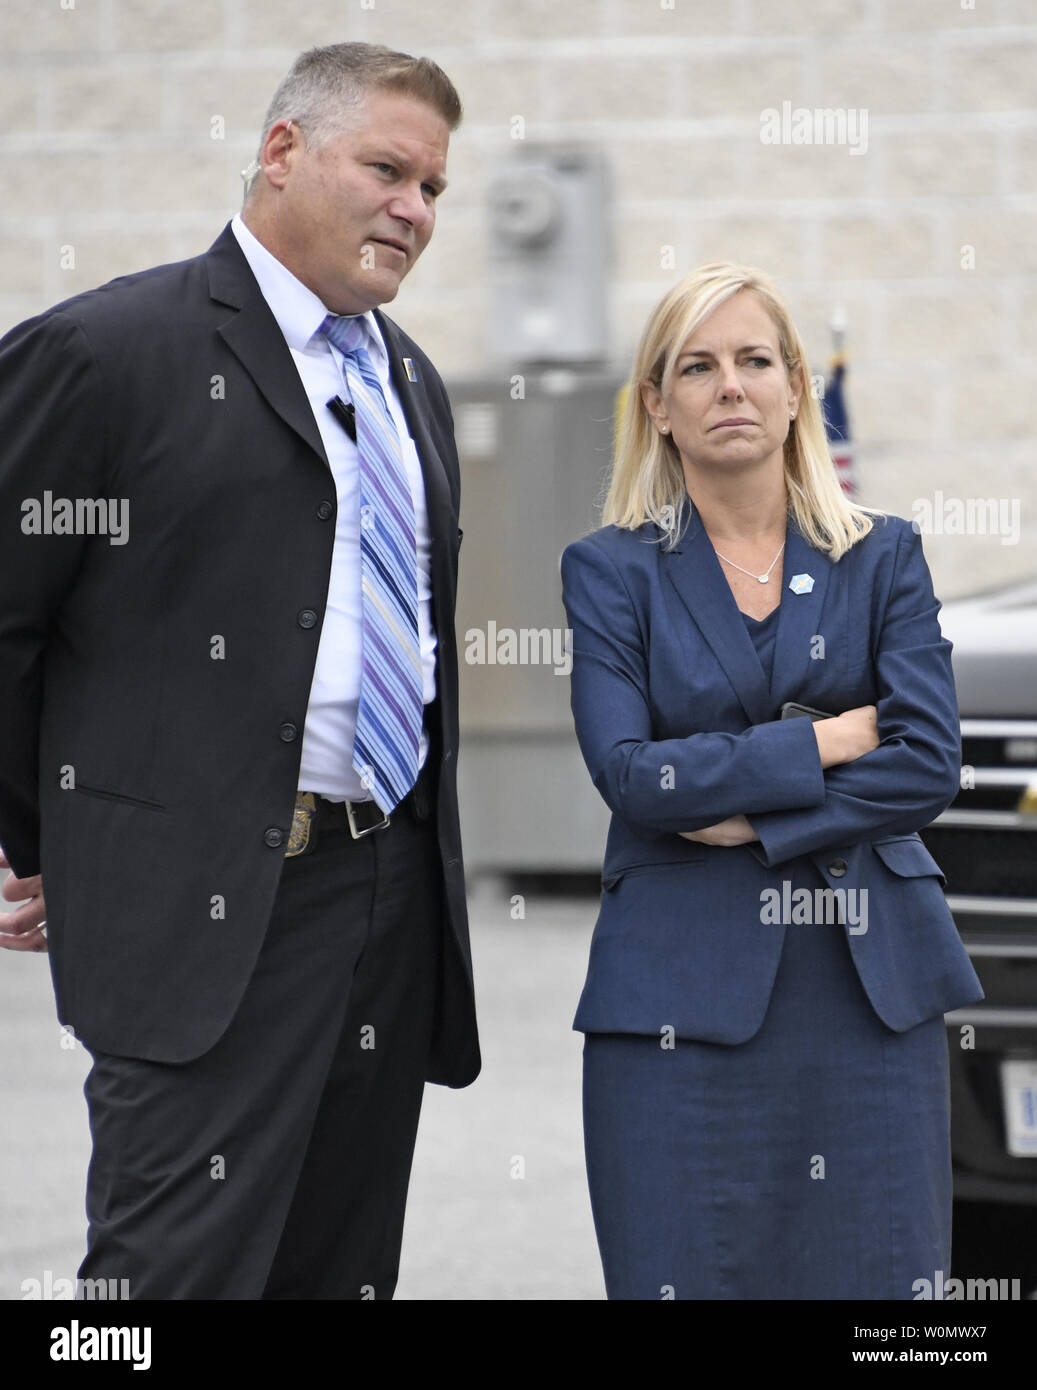 United States Secretary of Homeland Security-designate Kirstjen Nielsen, right, and an unidentified Secret Service agent look on as US President Donald J. Trump tours the US Secret Service James J. Rowley Training Center in Beltsville, Maryland on Friday, October 13, 2017.  Photo by Ron Sachs/UPI Stock Photo